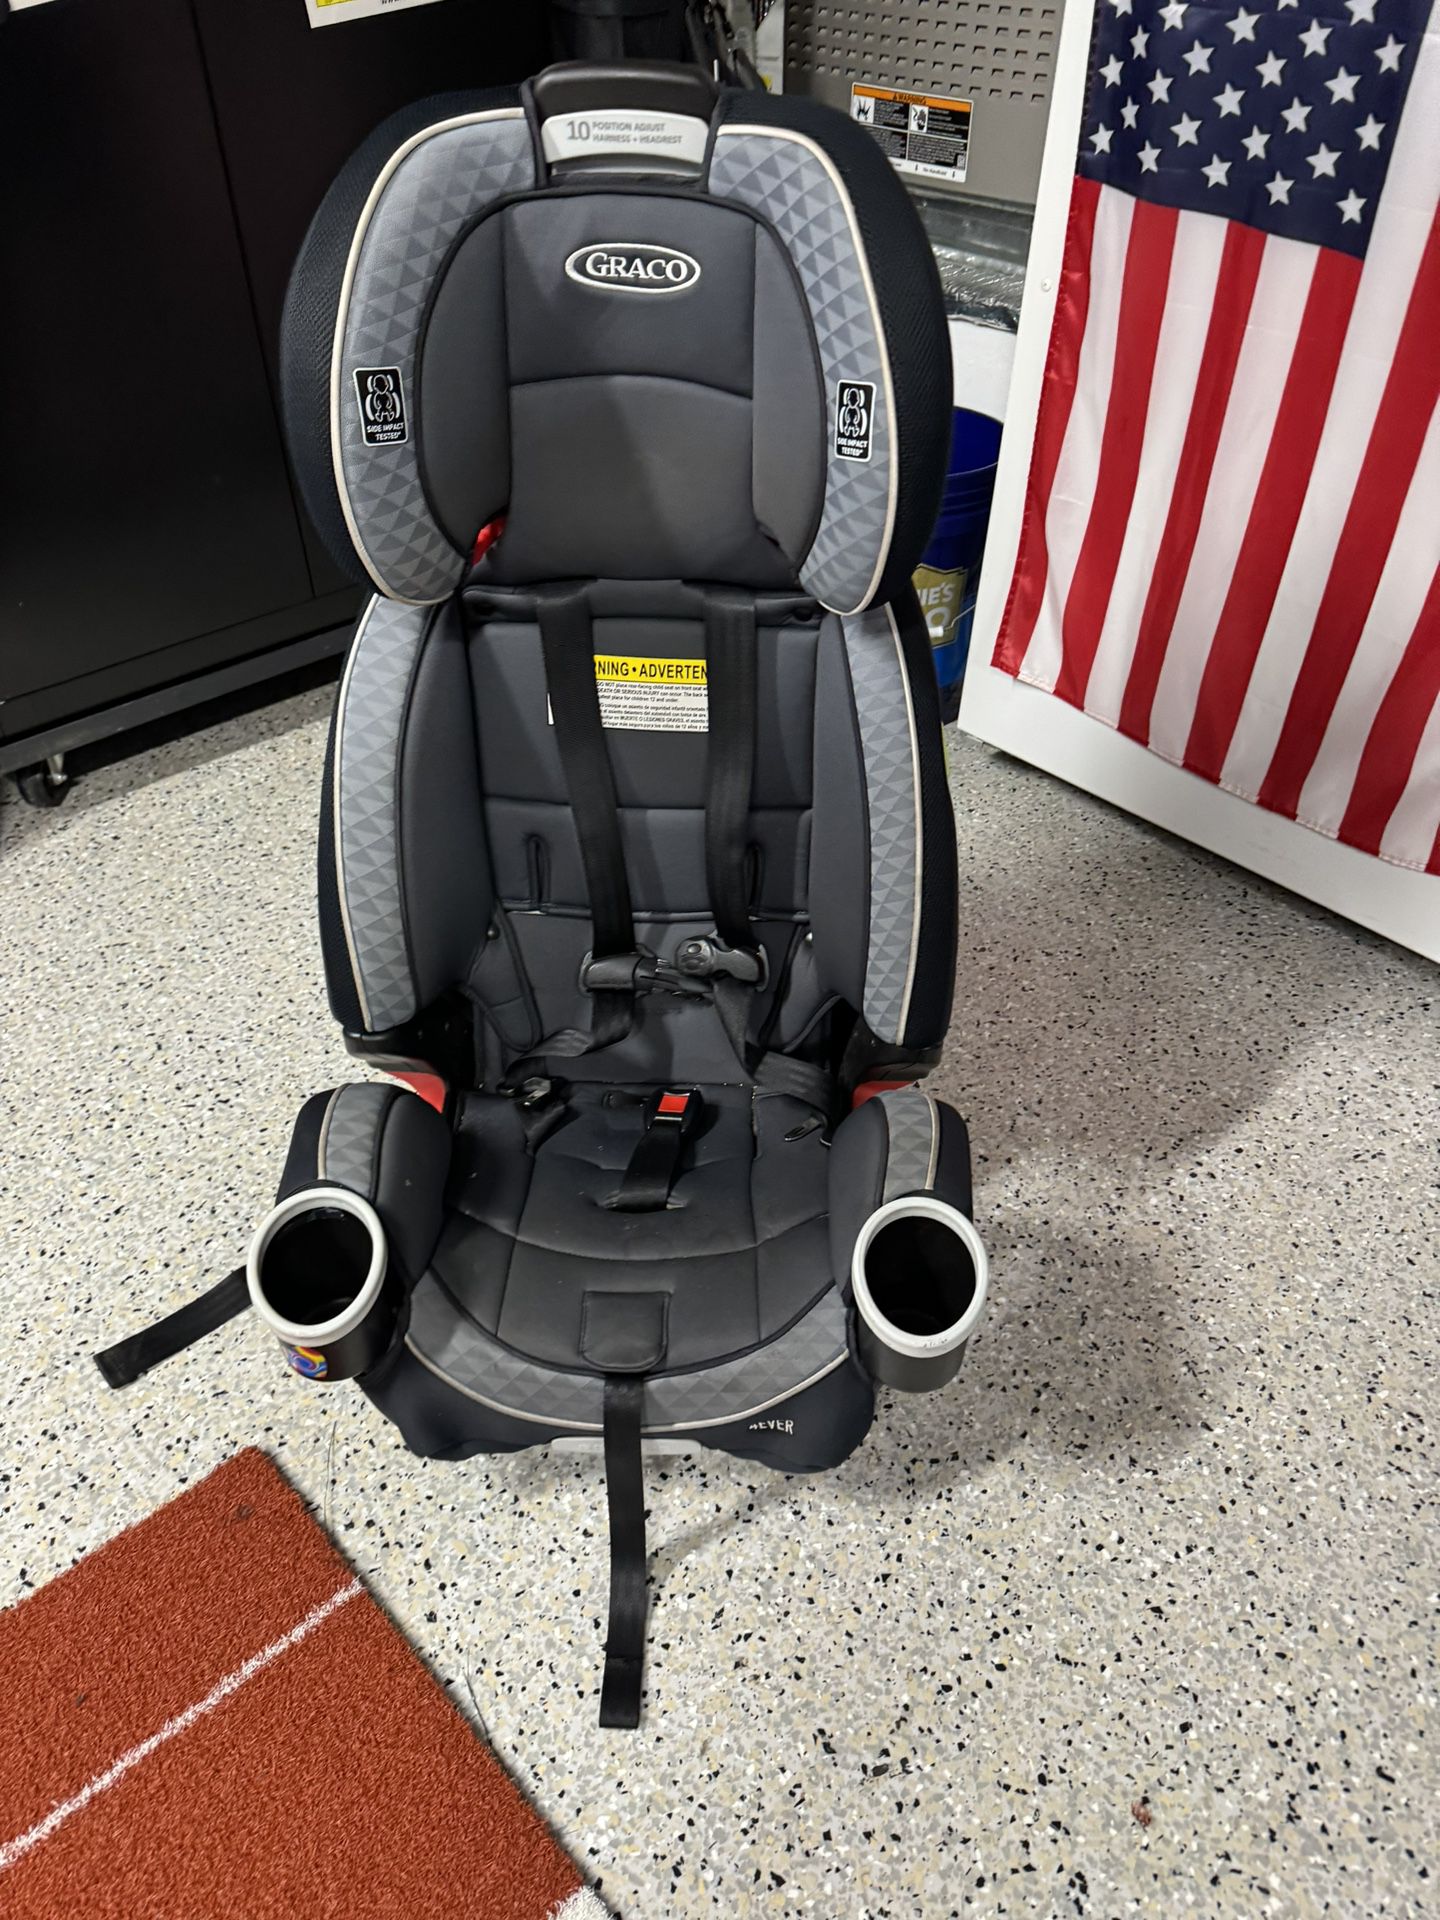 Greco - 4Ever- 4 In 1 Car seat